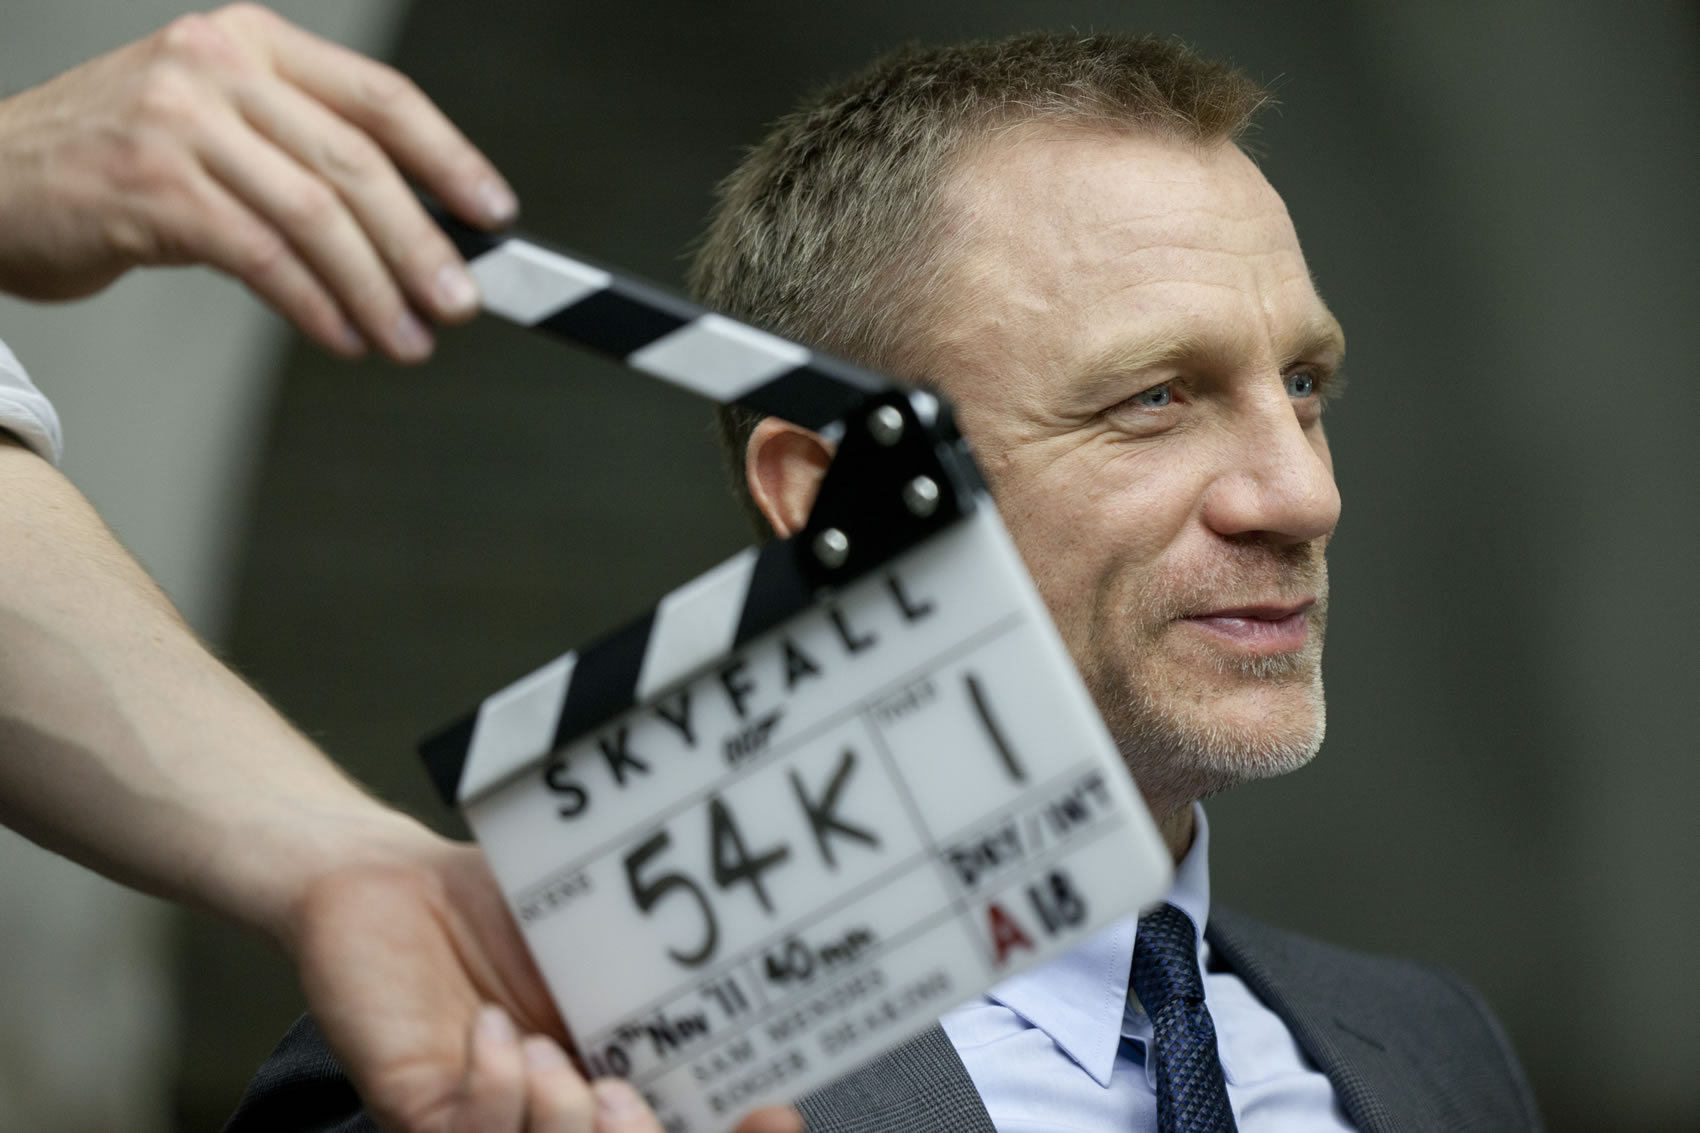 SKYFALL © 2012 Danjaq, LLC, United Artists Corporation, Columbia Pictures Industries, Inc. 007 Gun Logo and related James Bond Trademarks © 1962-2012 Danjaq, LLC and United Artists Corporation. SKYFALL, 007 and related James Bond Trademarks are trademarks of Danjaq, LLC. All Rights Reserved.